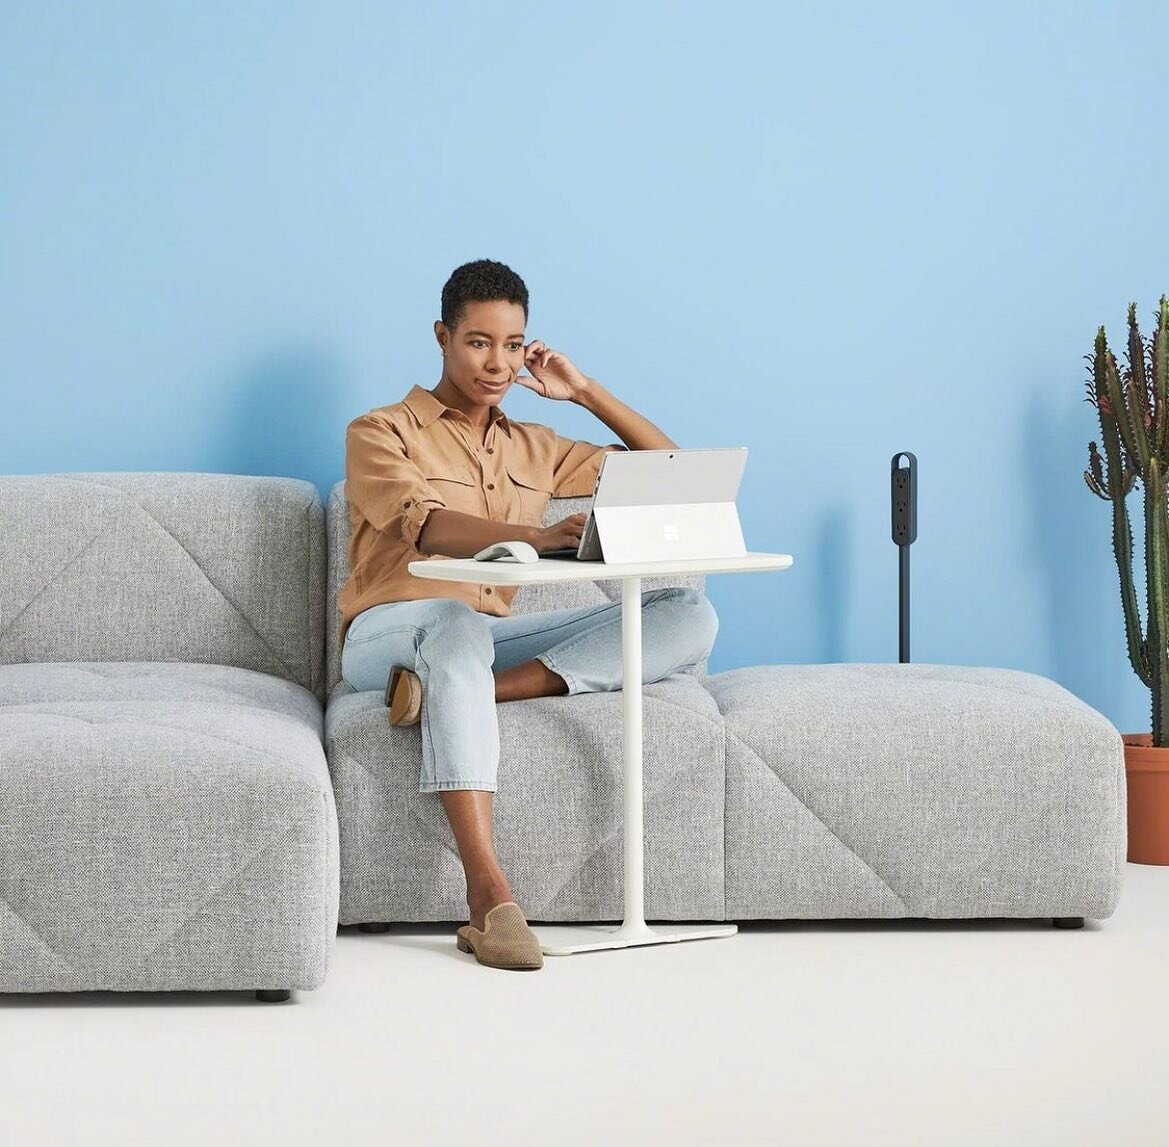 The BFF Sofa from @steelcase via @moooi is everyone's new best friend. 👯 The high quality, soft yet firm modular sofa system, offers endless configurations. Learn more by contacting us.
⁠
#betterispossible #workbetter #moooi #workplacedesign #office